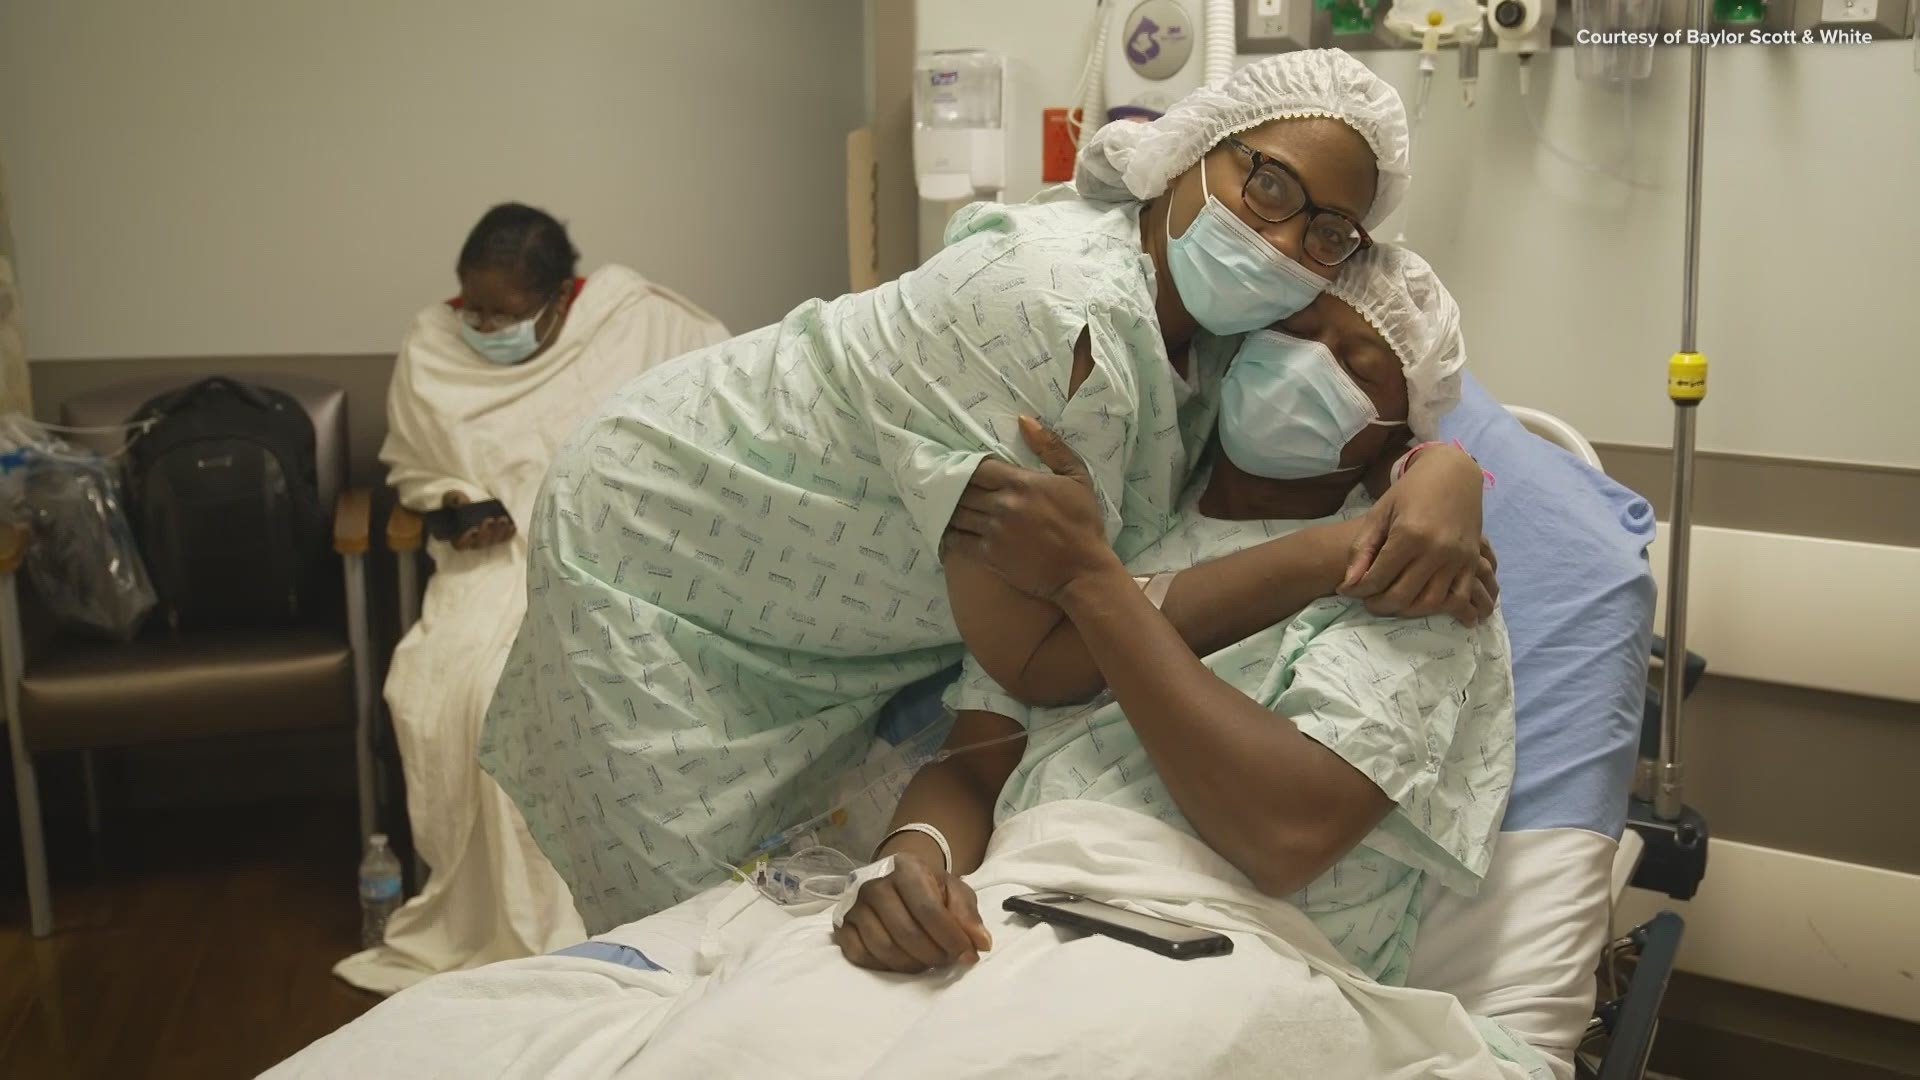 The couple spent months traveling between their home in Shreveport, Louisiana to Baylor University Medical Center in Dallas for dialysis and treatments.